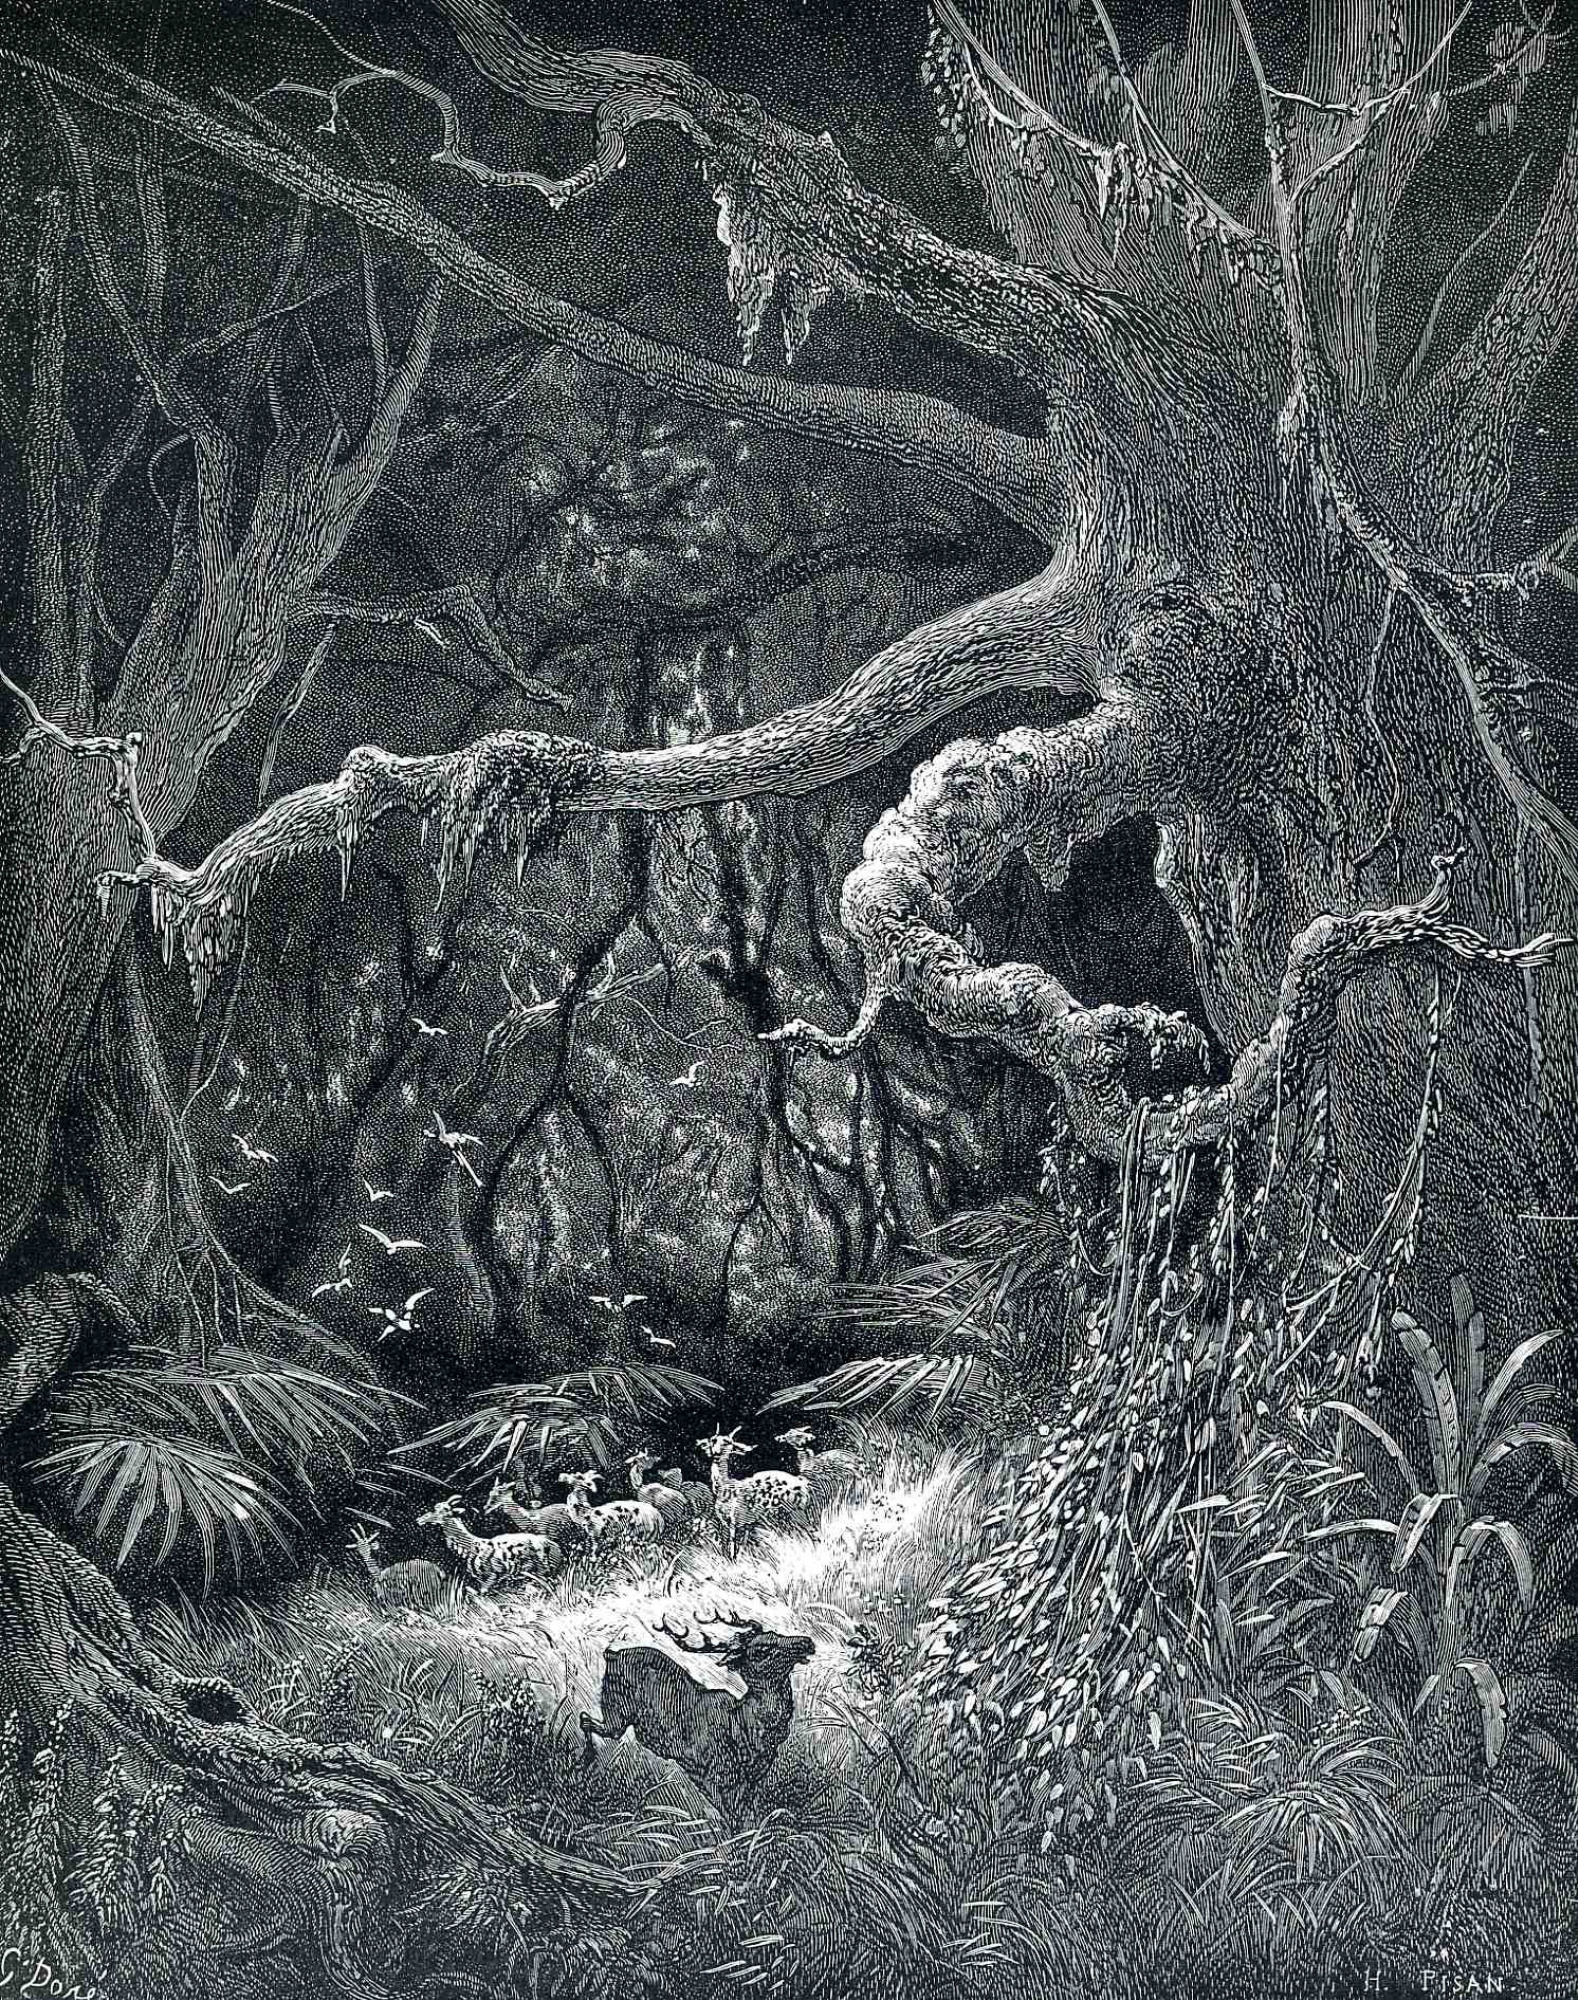 Enchanted forest, XIX by Paul Gustave Dore: History, Analysis & Facts